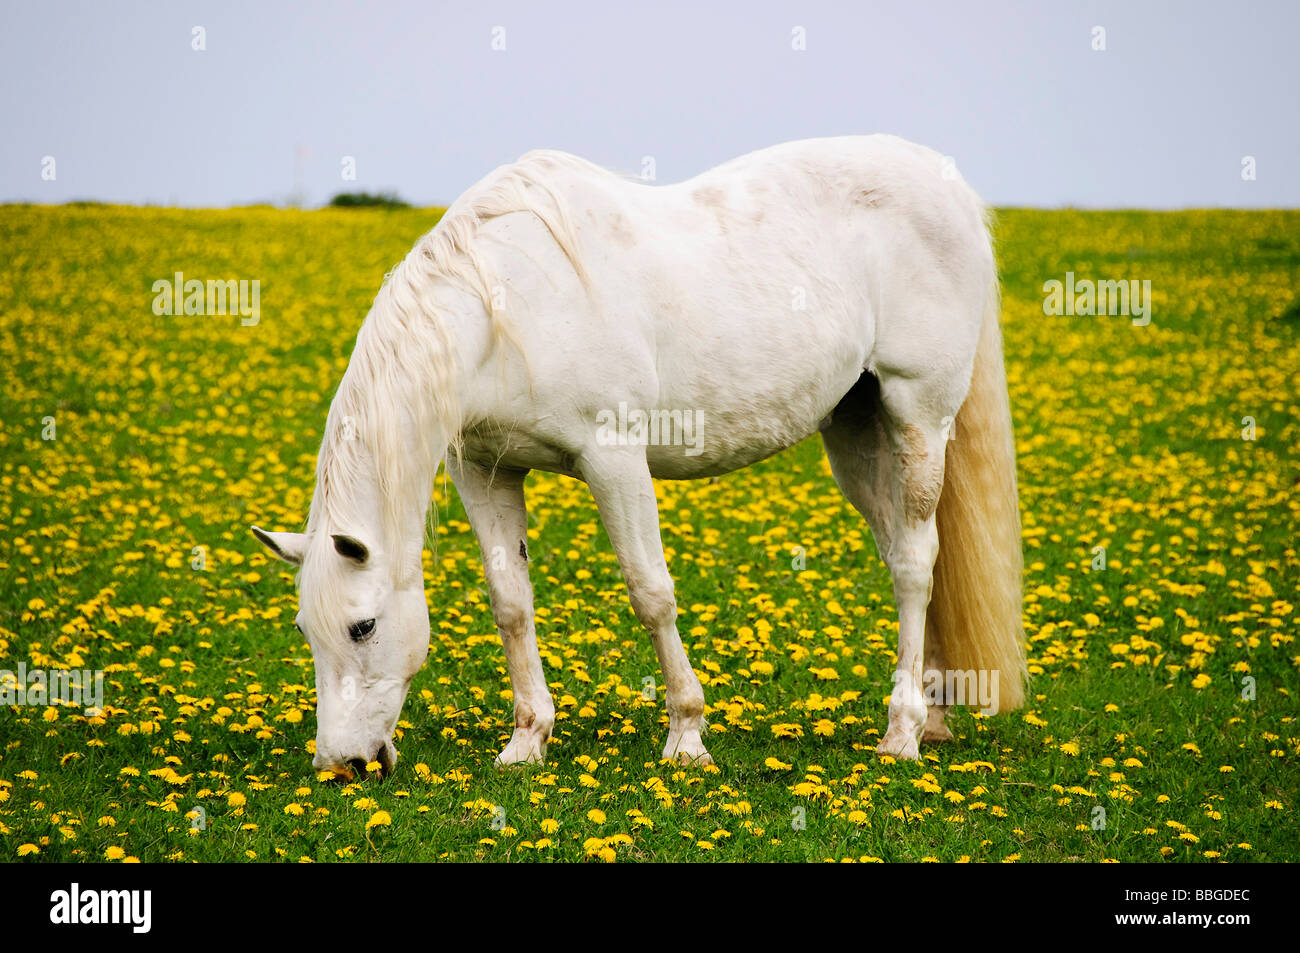 A white horse on a lush meadow with dandelions, Sylt island, Schleswig-Holstein, Germany, Europe Stock Photo